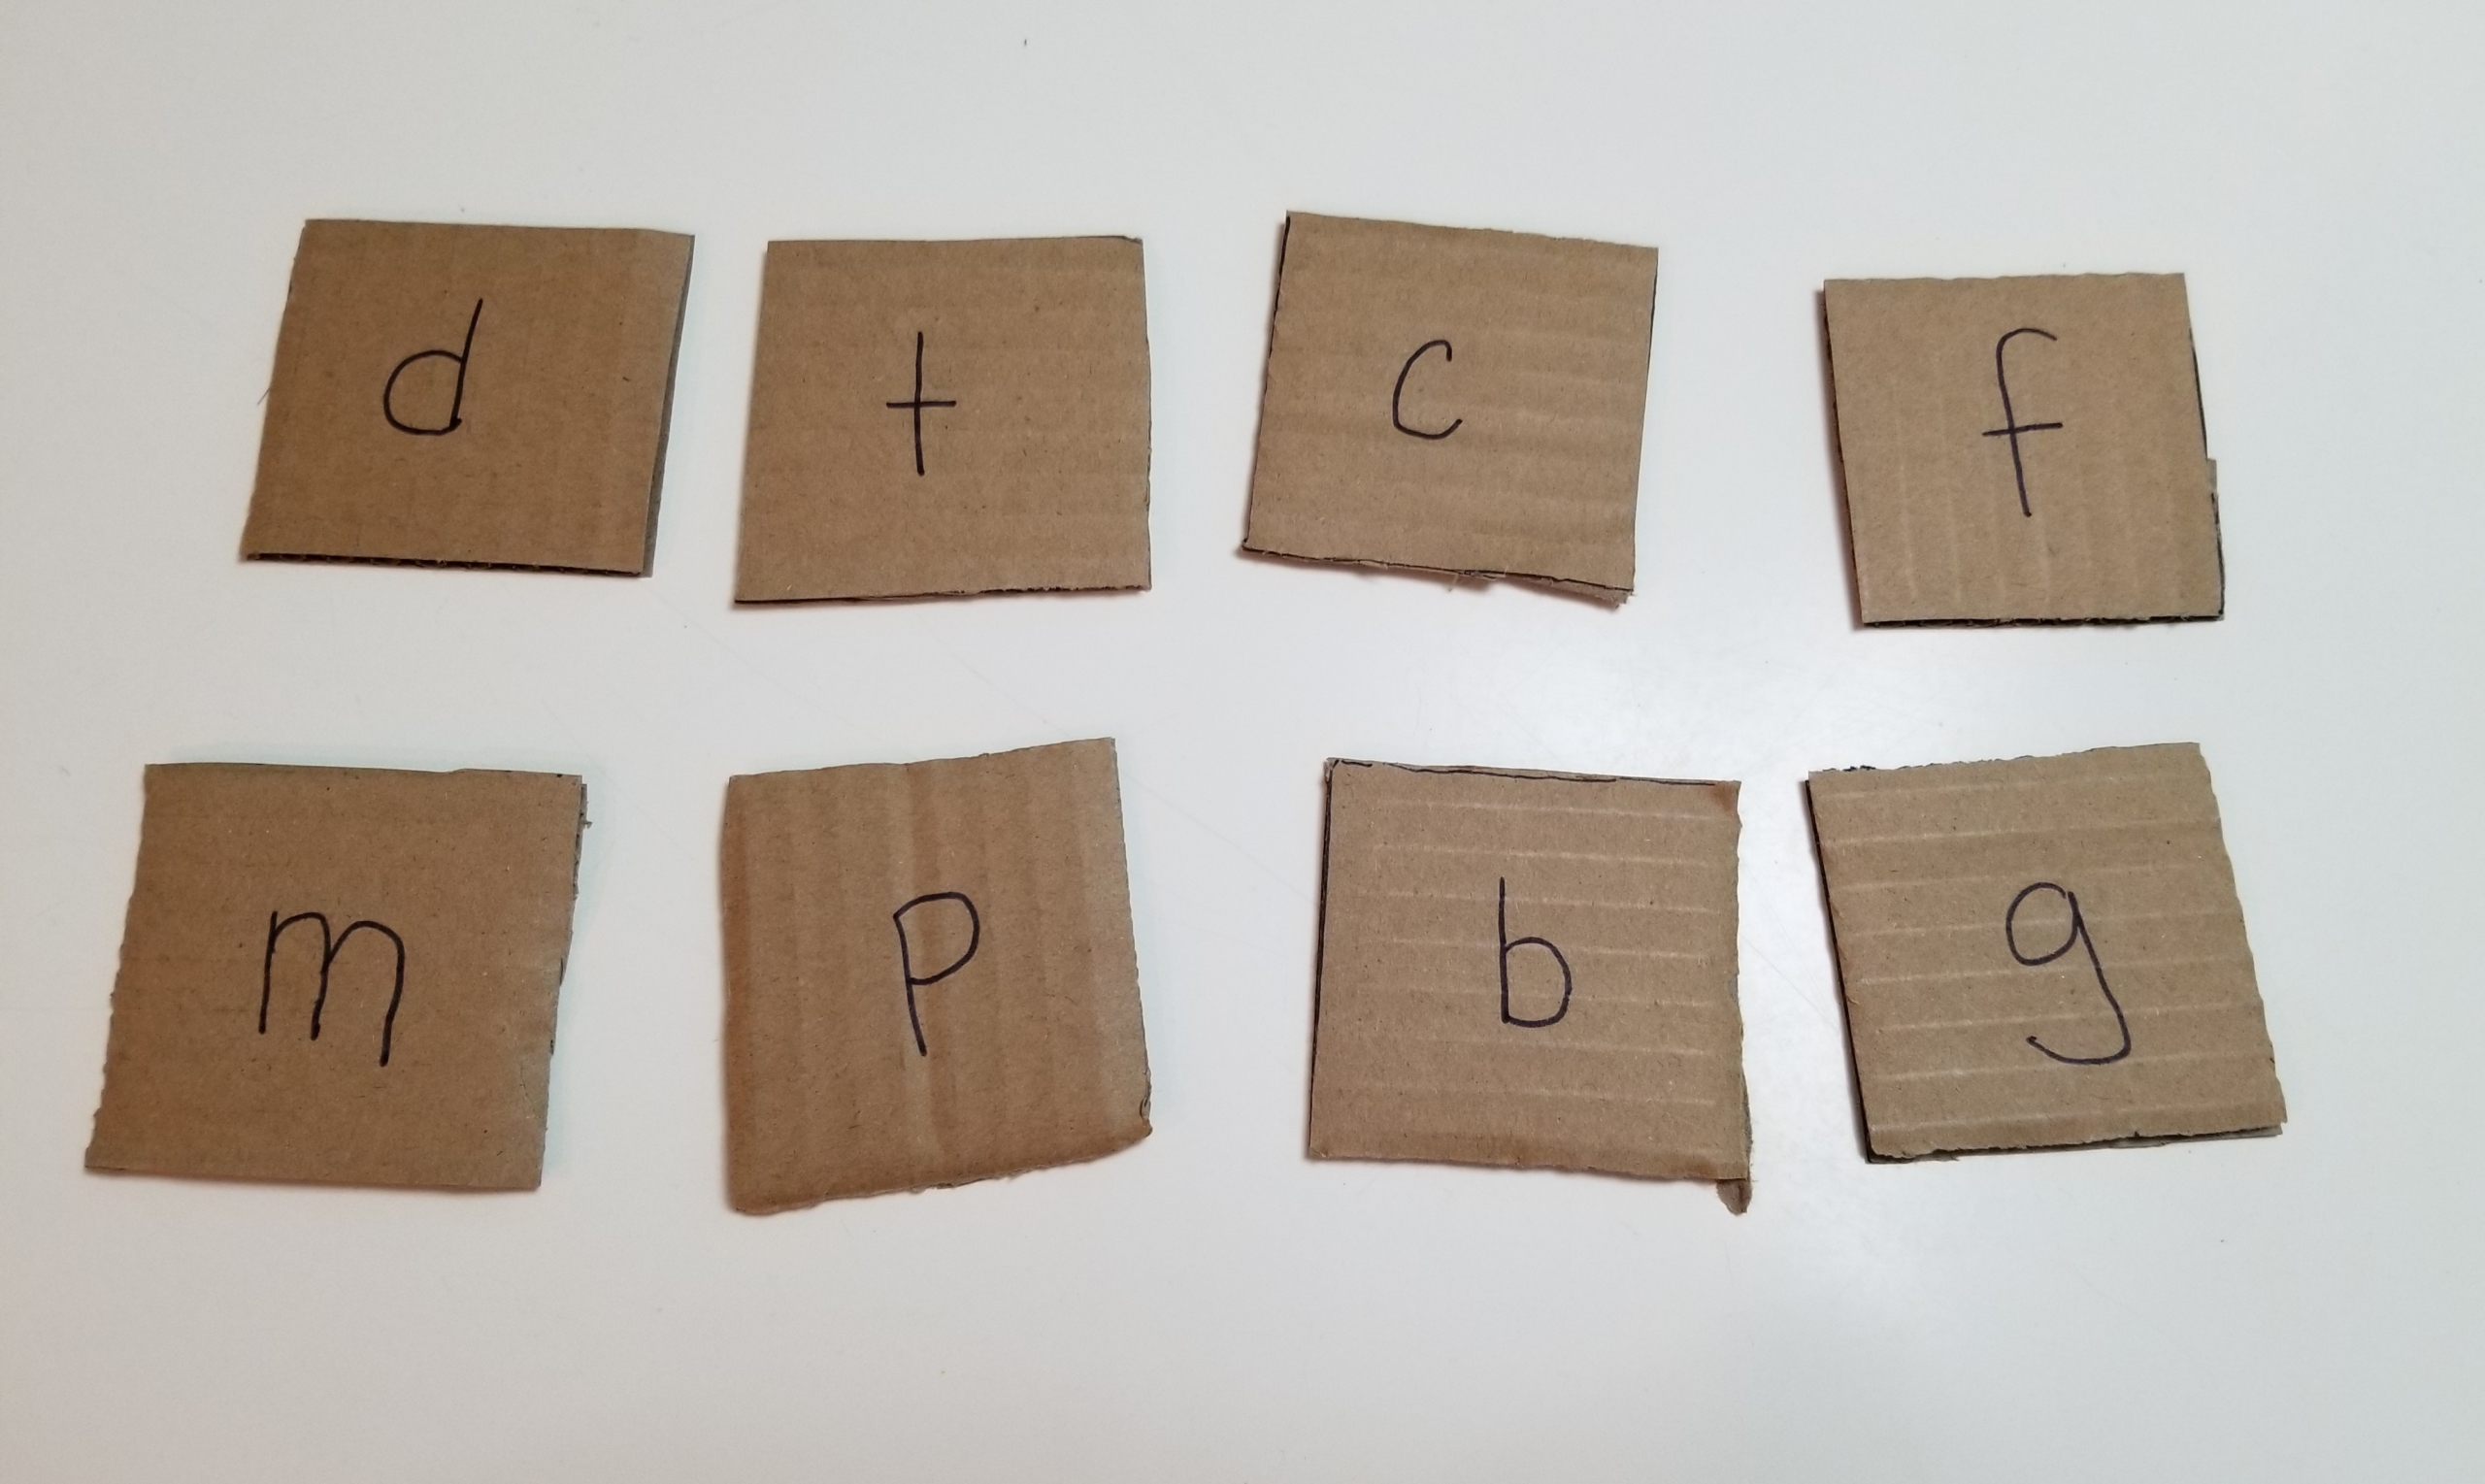 cardboard cut into squares with letters written on each one